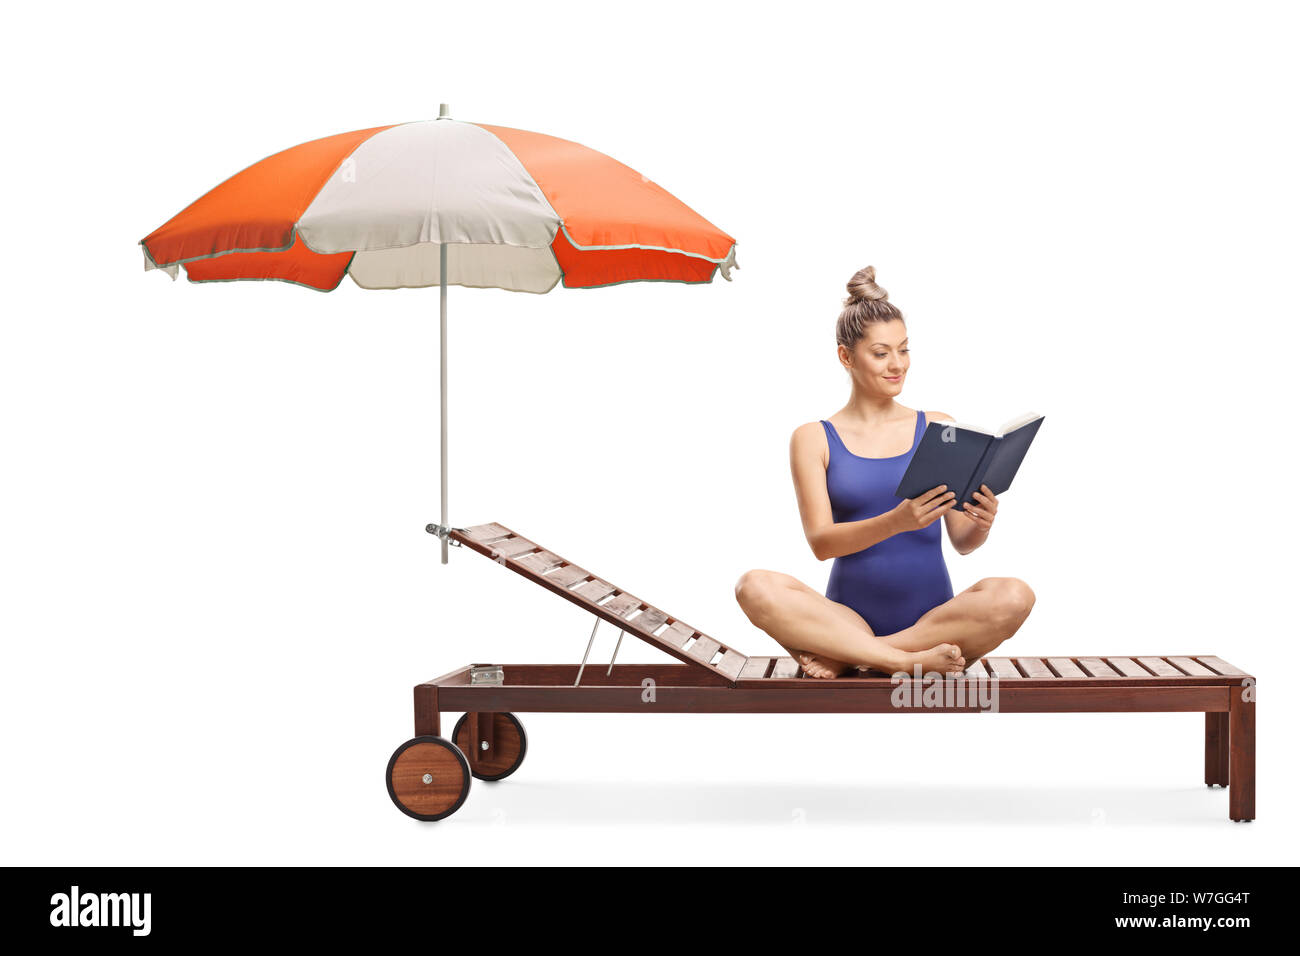 Young woman in a swimming suit sitting on a sunbed with umbrella and reading a book isolated on white background Stock Photo